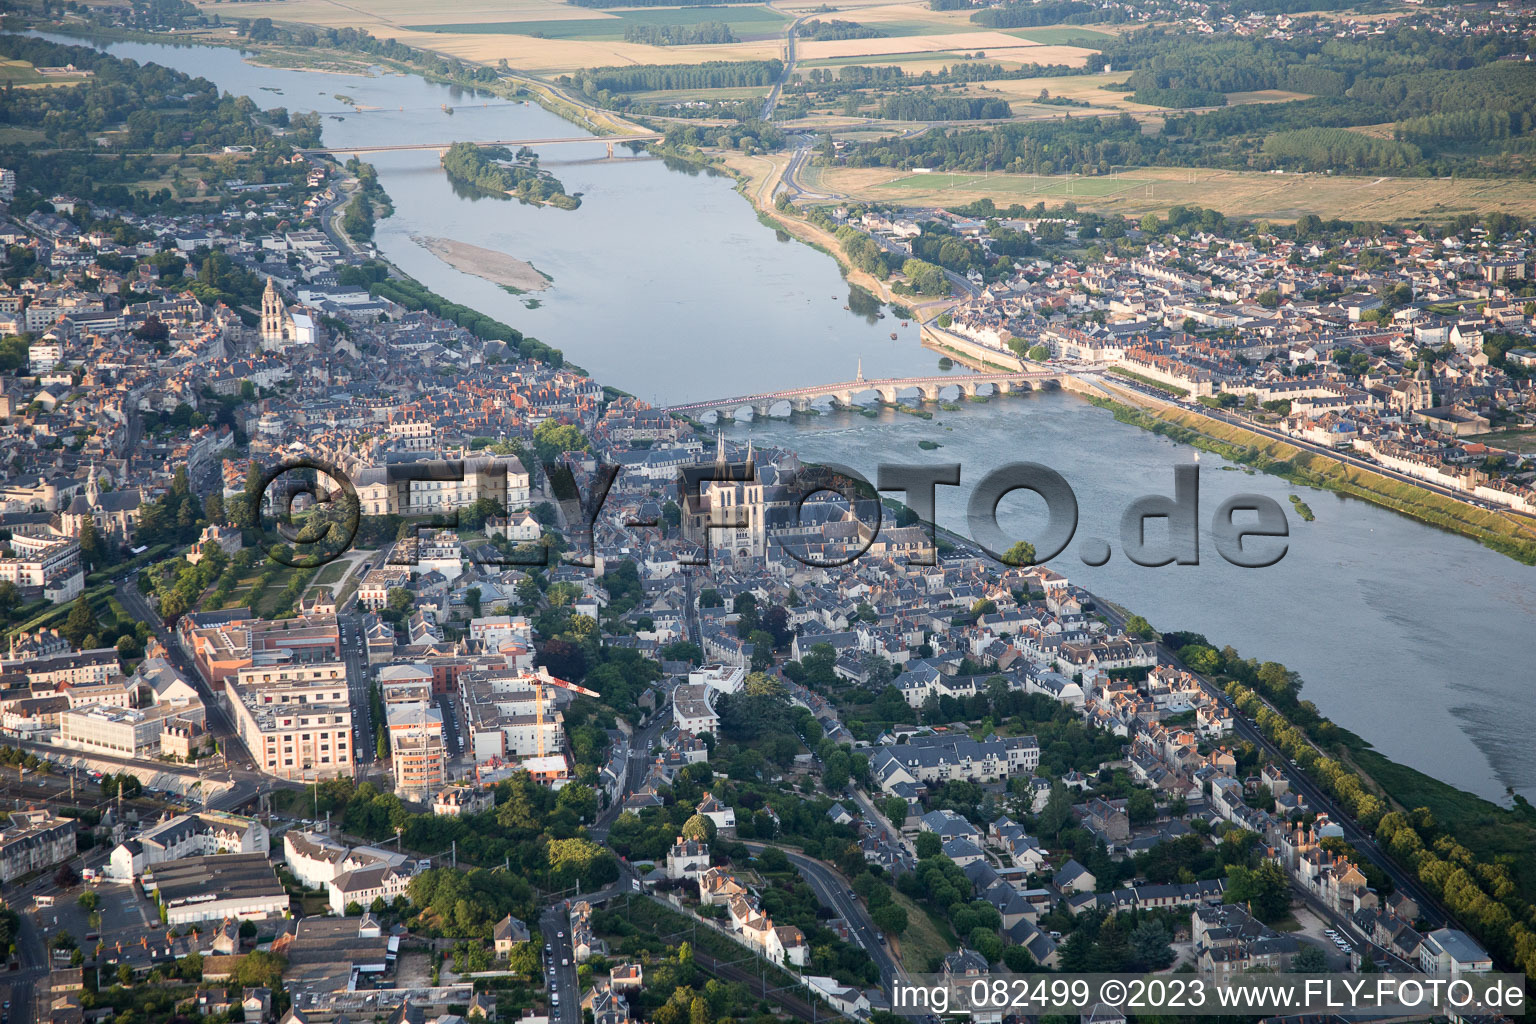 Blois in the state Loir et Cher, France viewn from the air